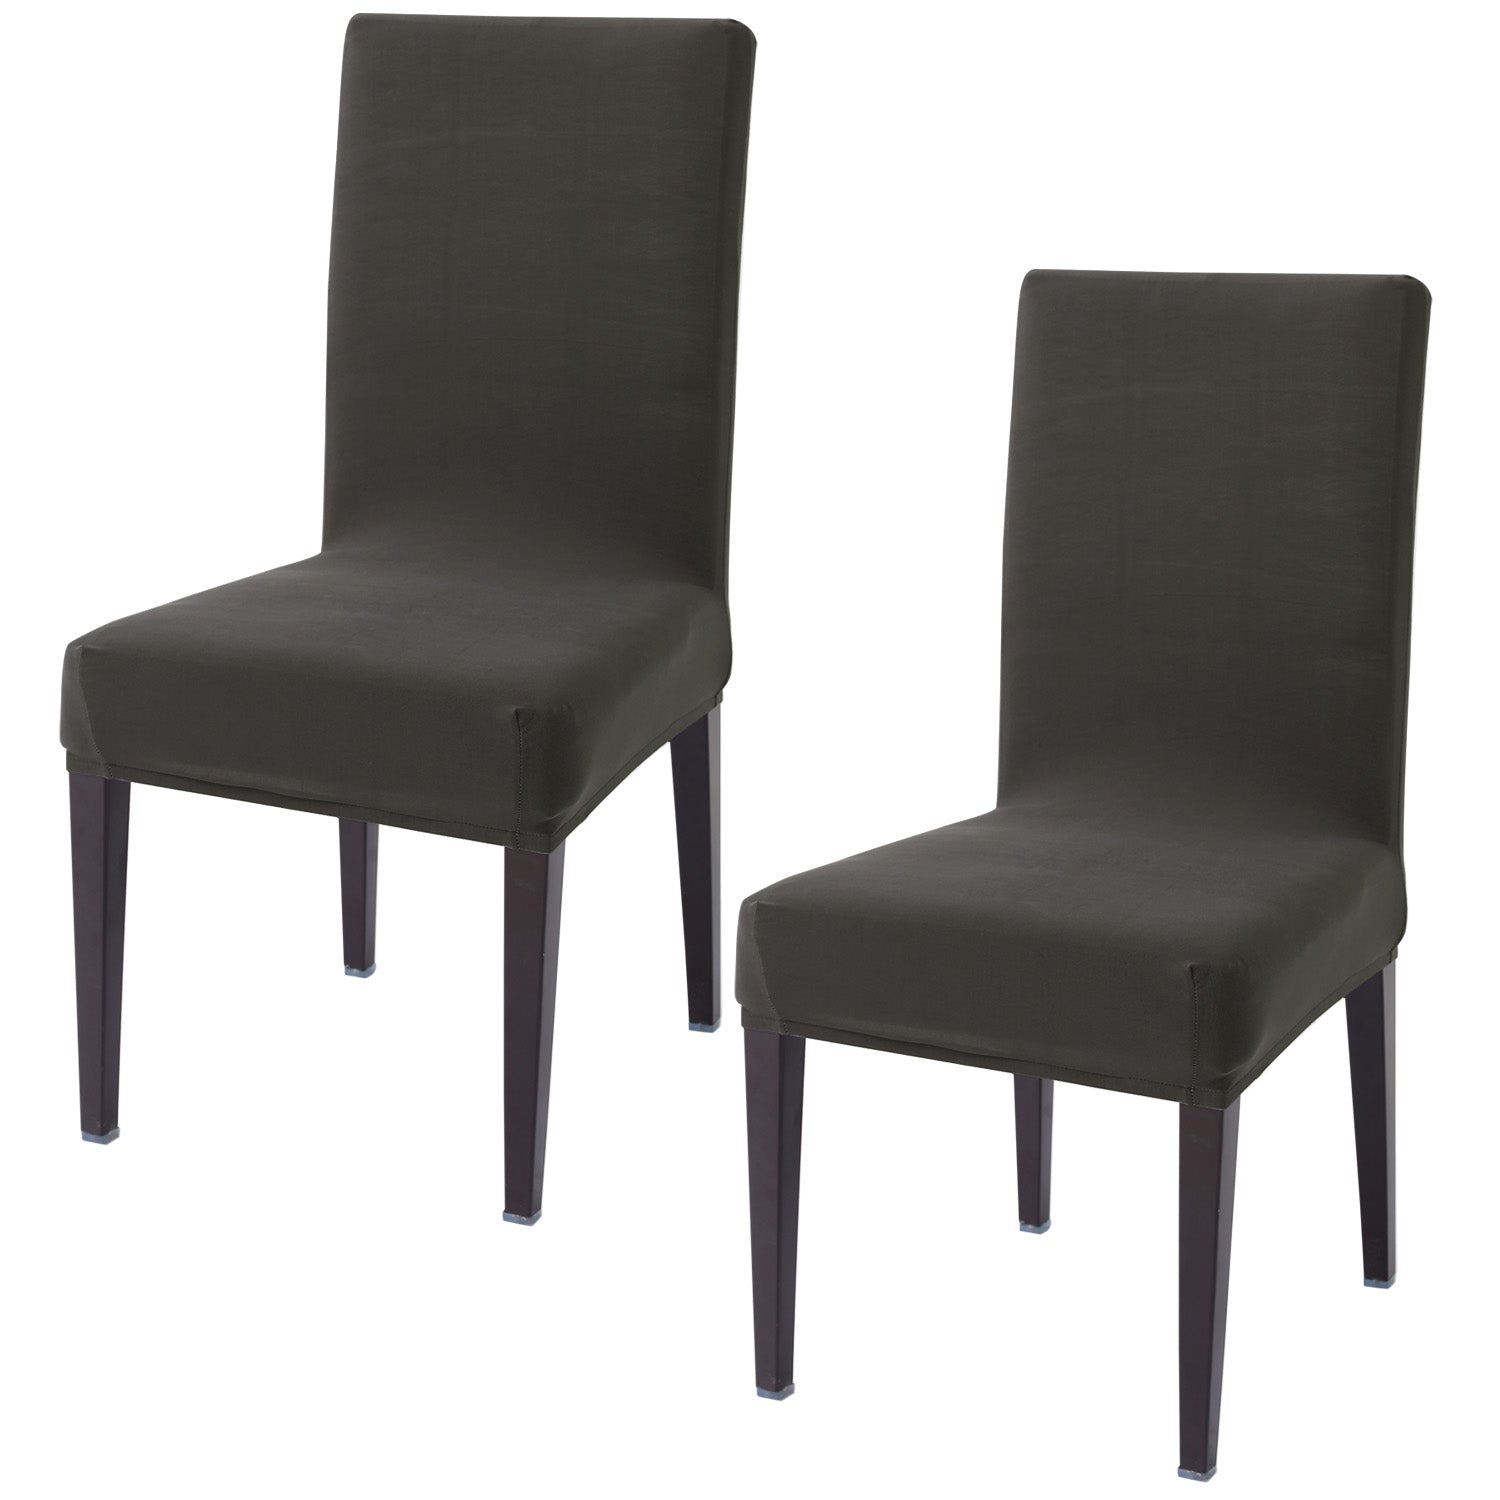 Elastic Stretchable Dining Chair Cover, Dark Grey